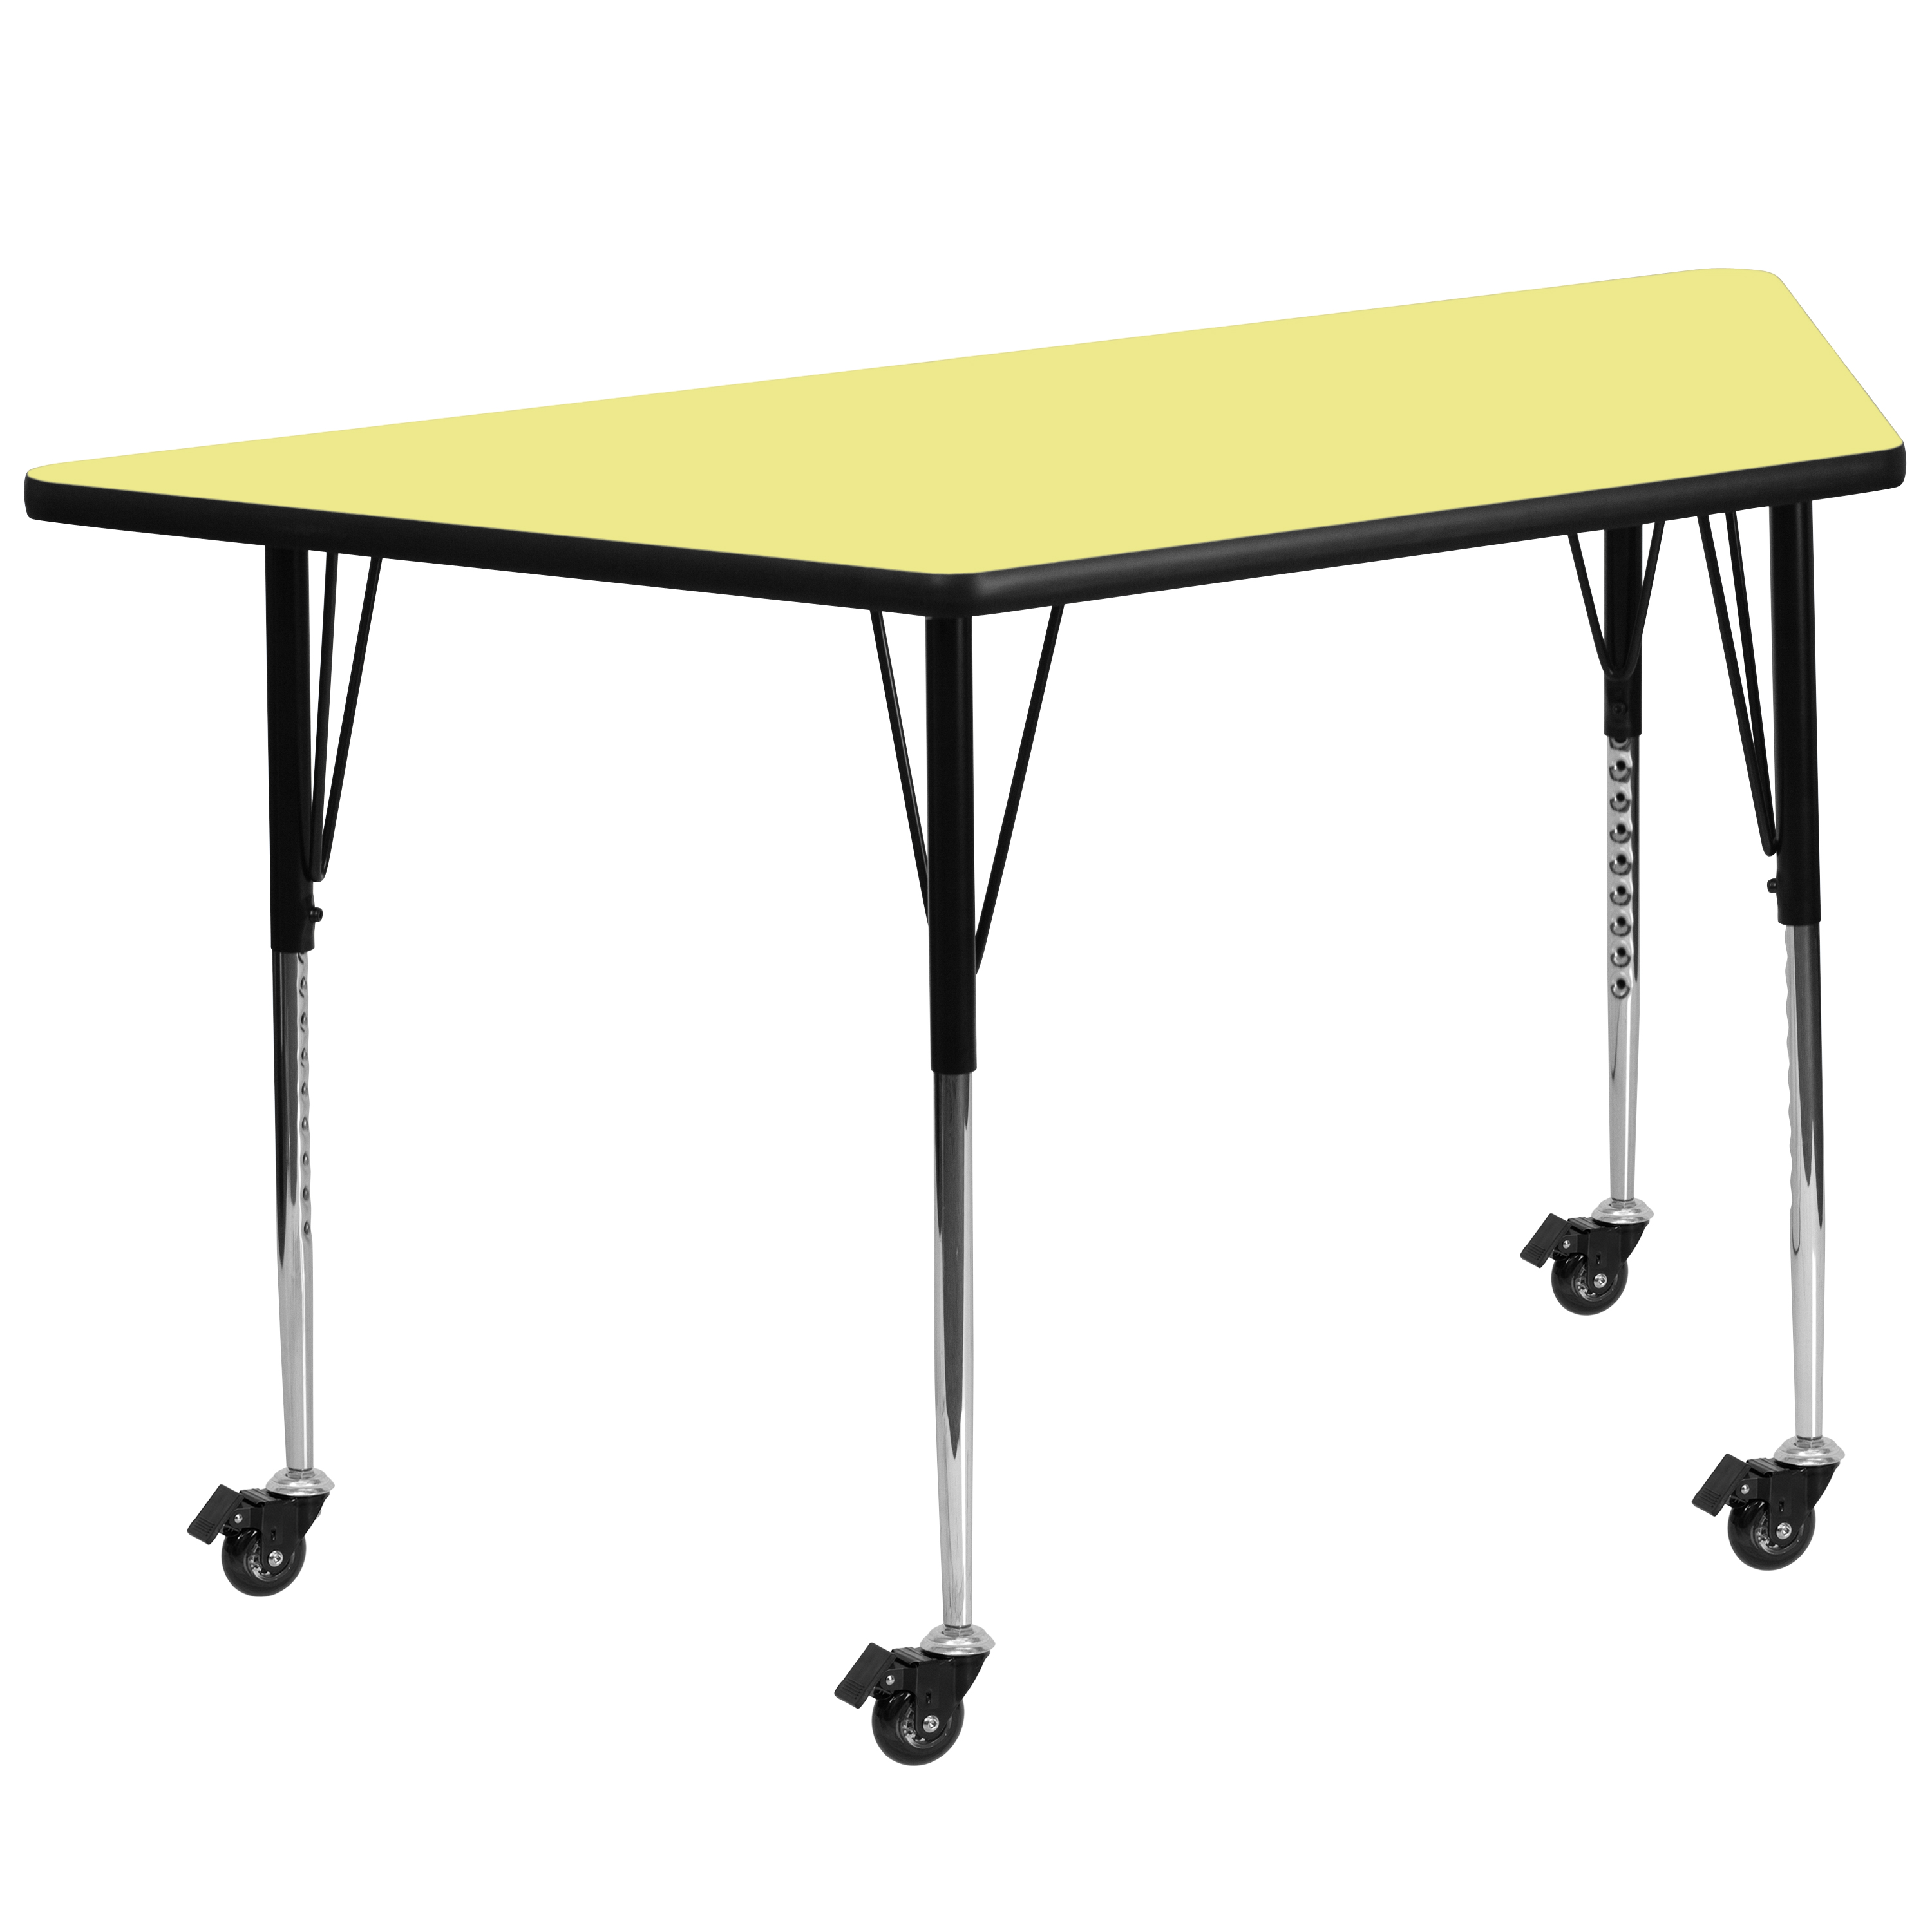 Flash Furniture Mobile 29''W x 57''L Trapezoid Yellow Thermal Laminate Activity Table - Standard Height Adjustable Legs - image 1 of 5